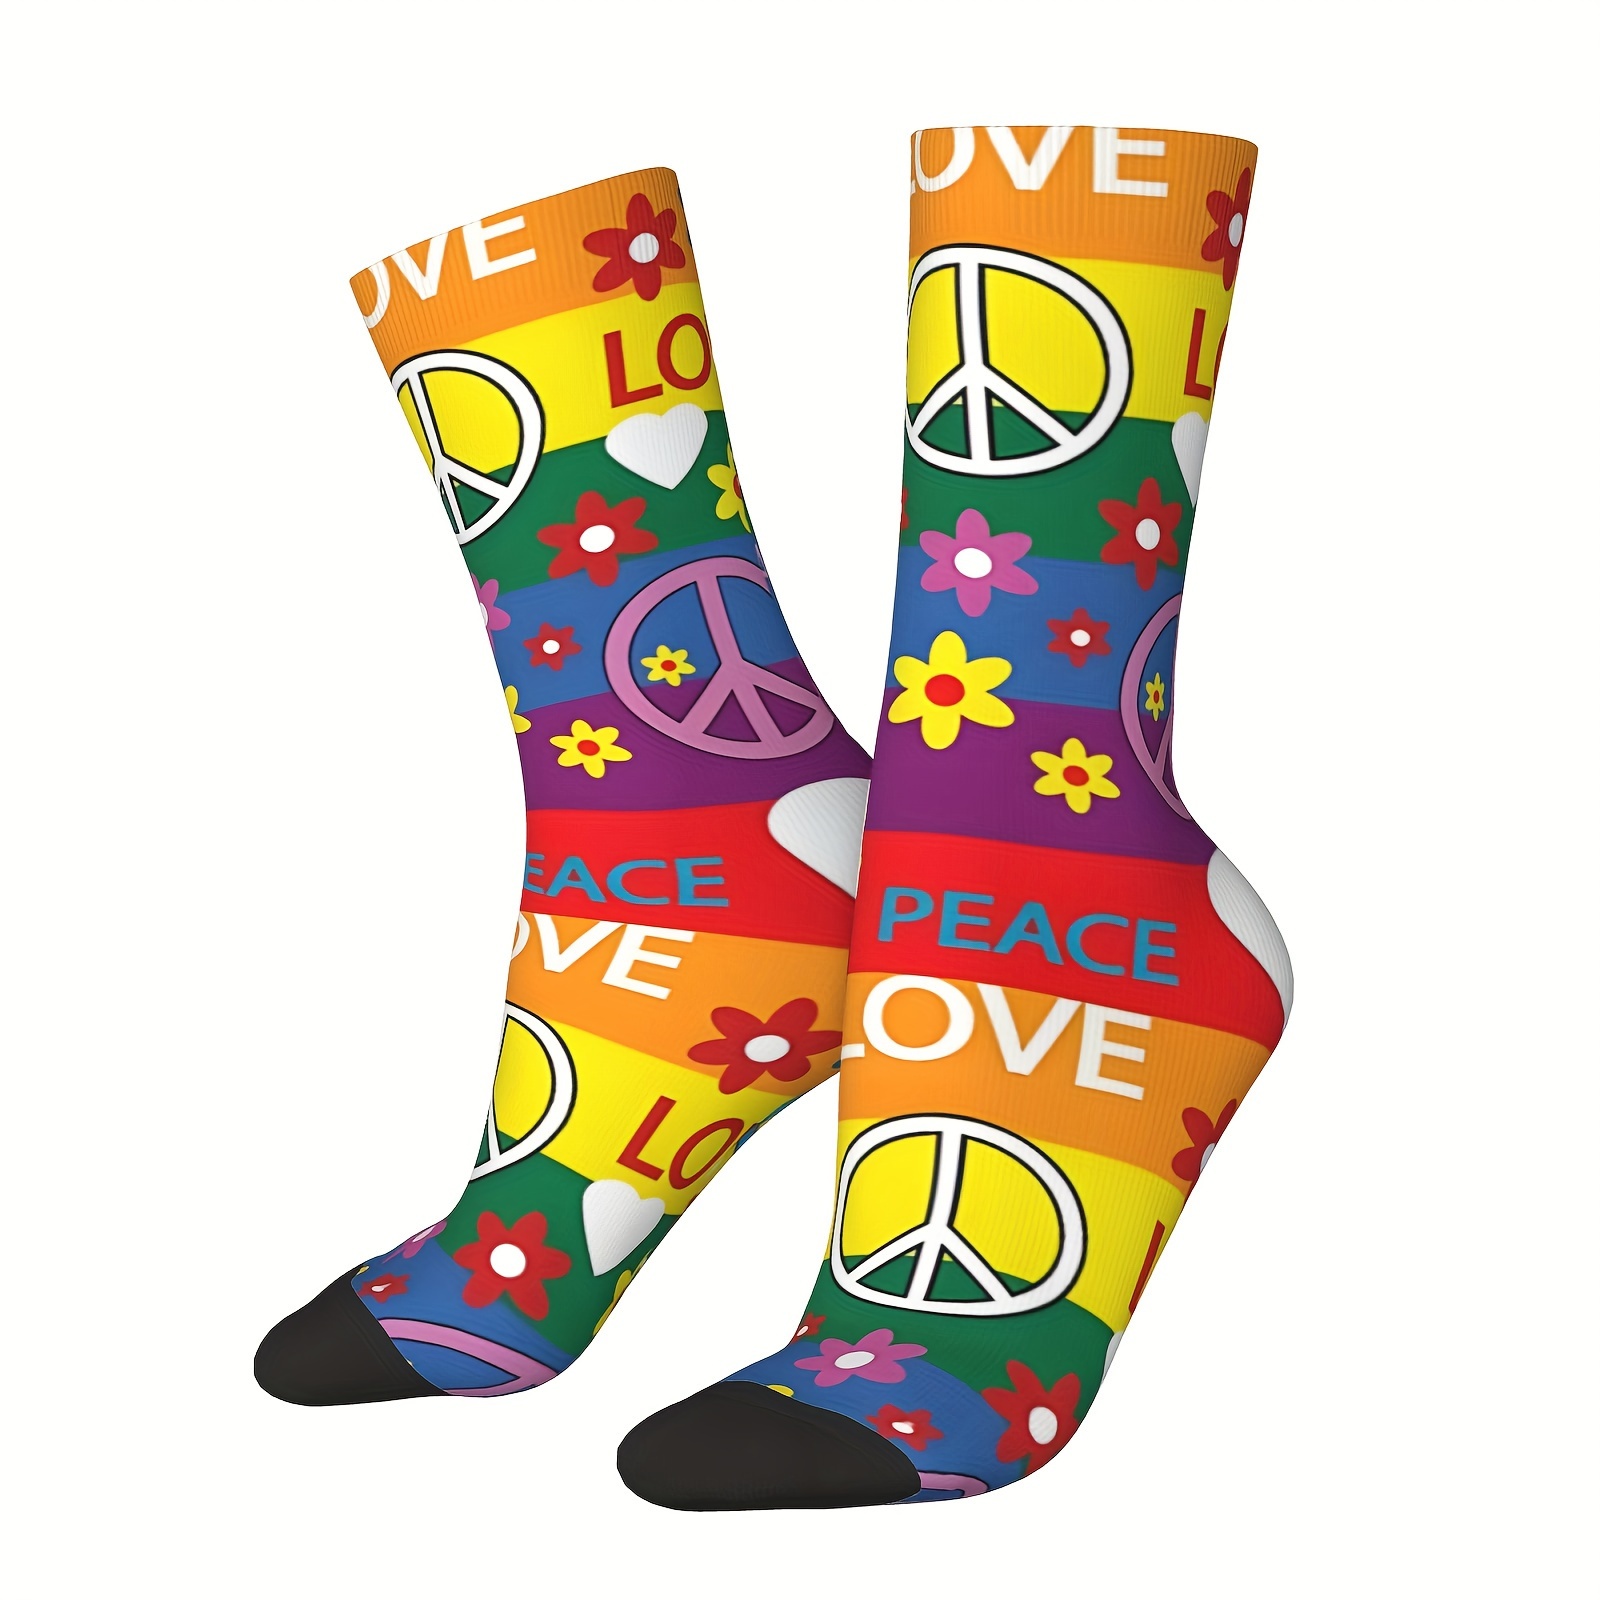 

Love & Peace Hippie-inspired Crew Socks For Men - Novelty Harajuku Style, Breathable Polyester Blend, Perfect Gift Idea